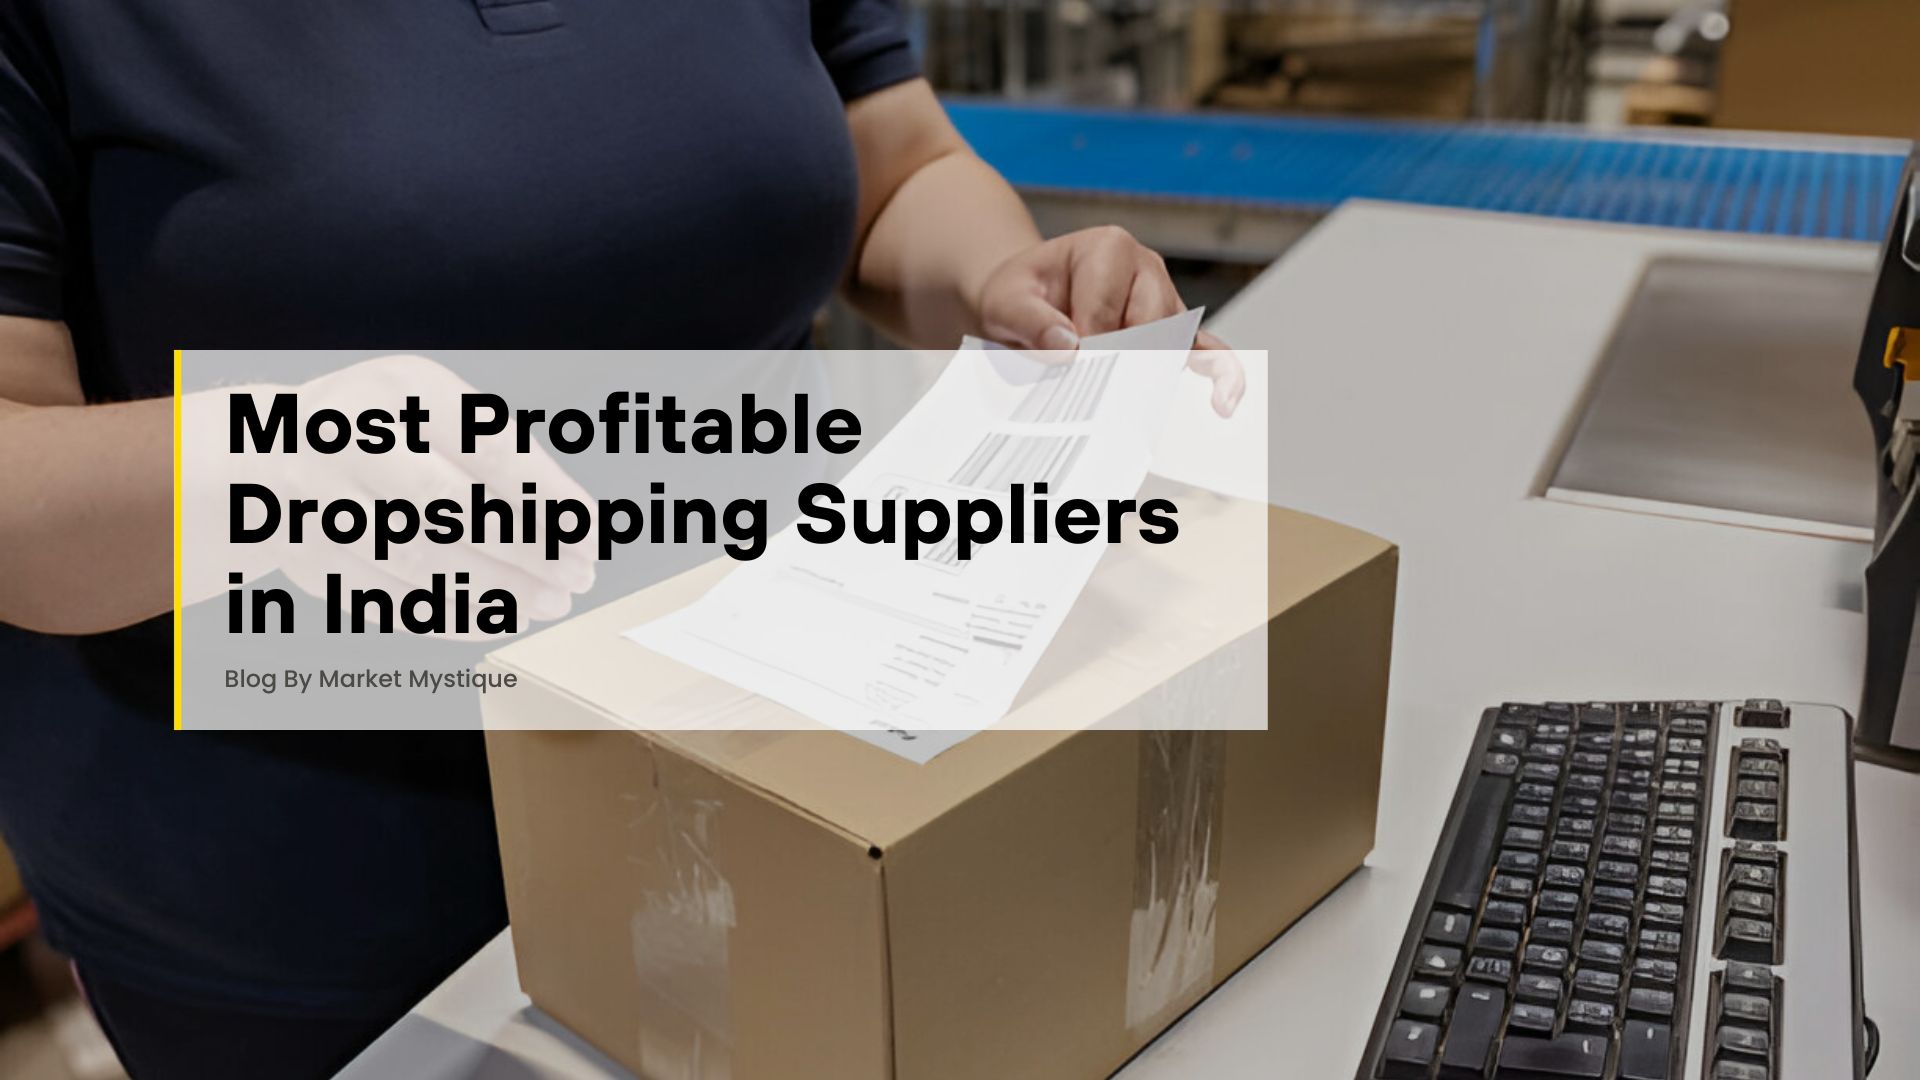 Dropshipping Suppliers in India